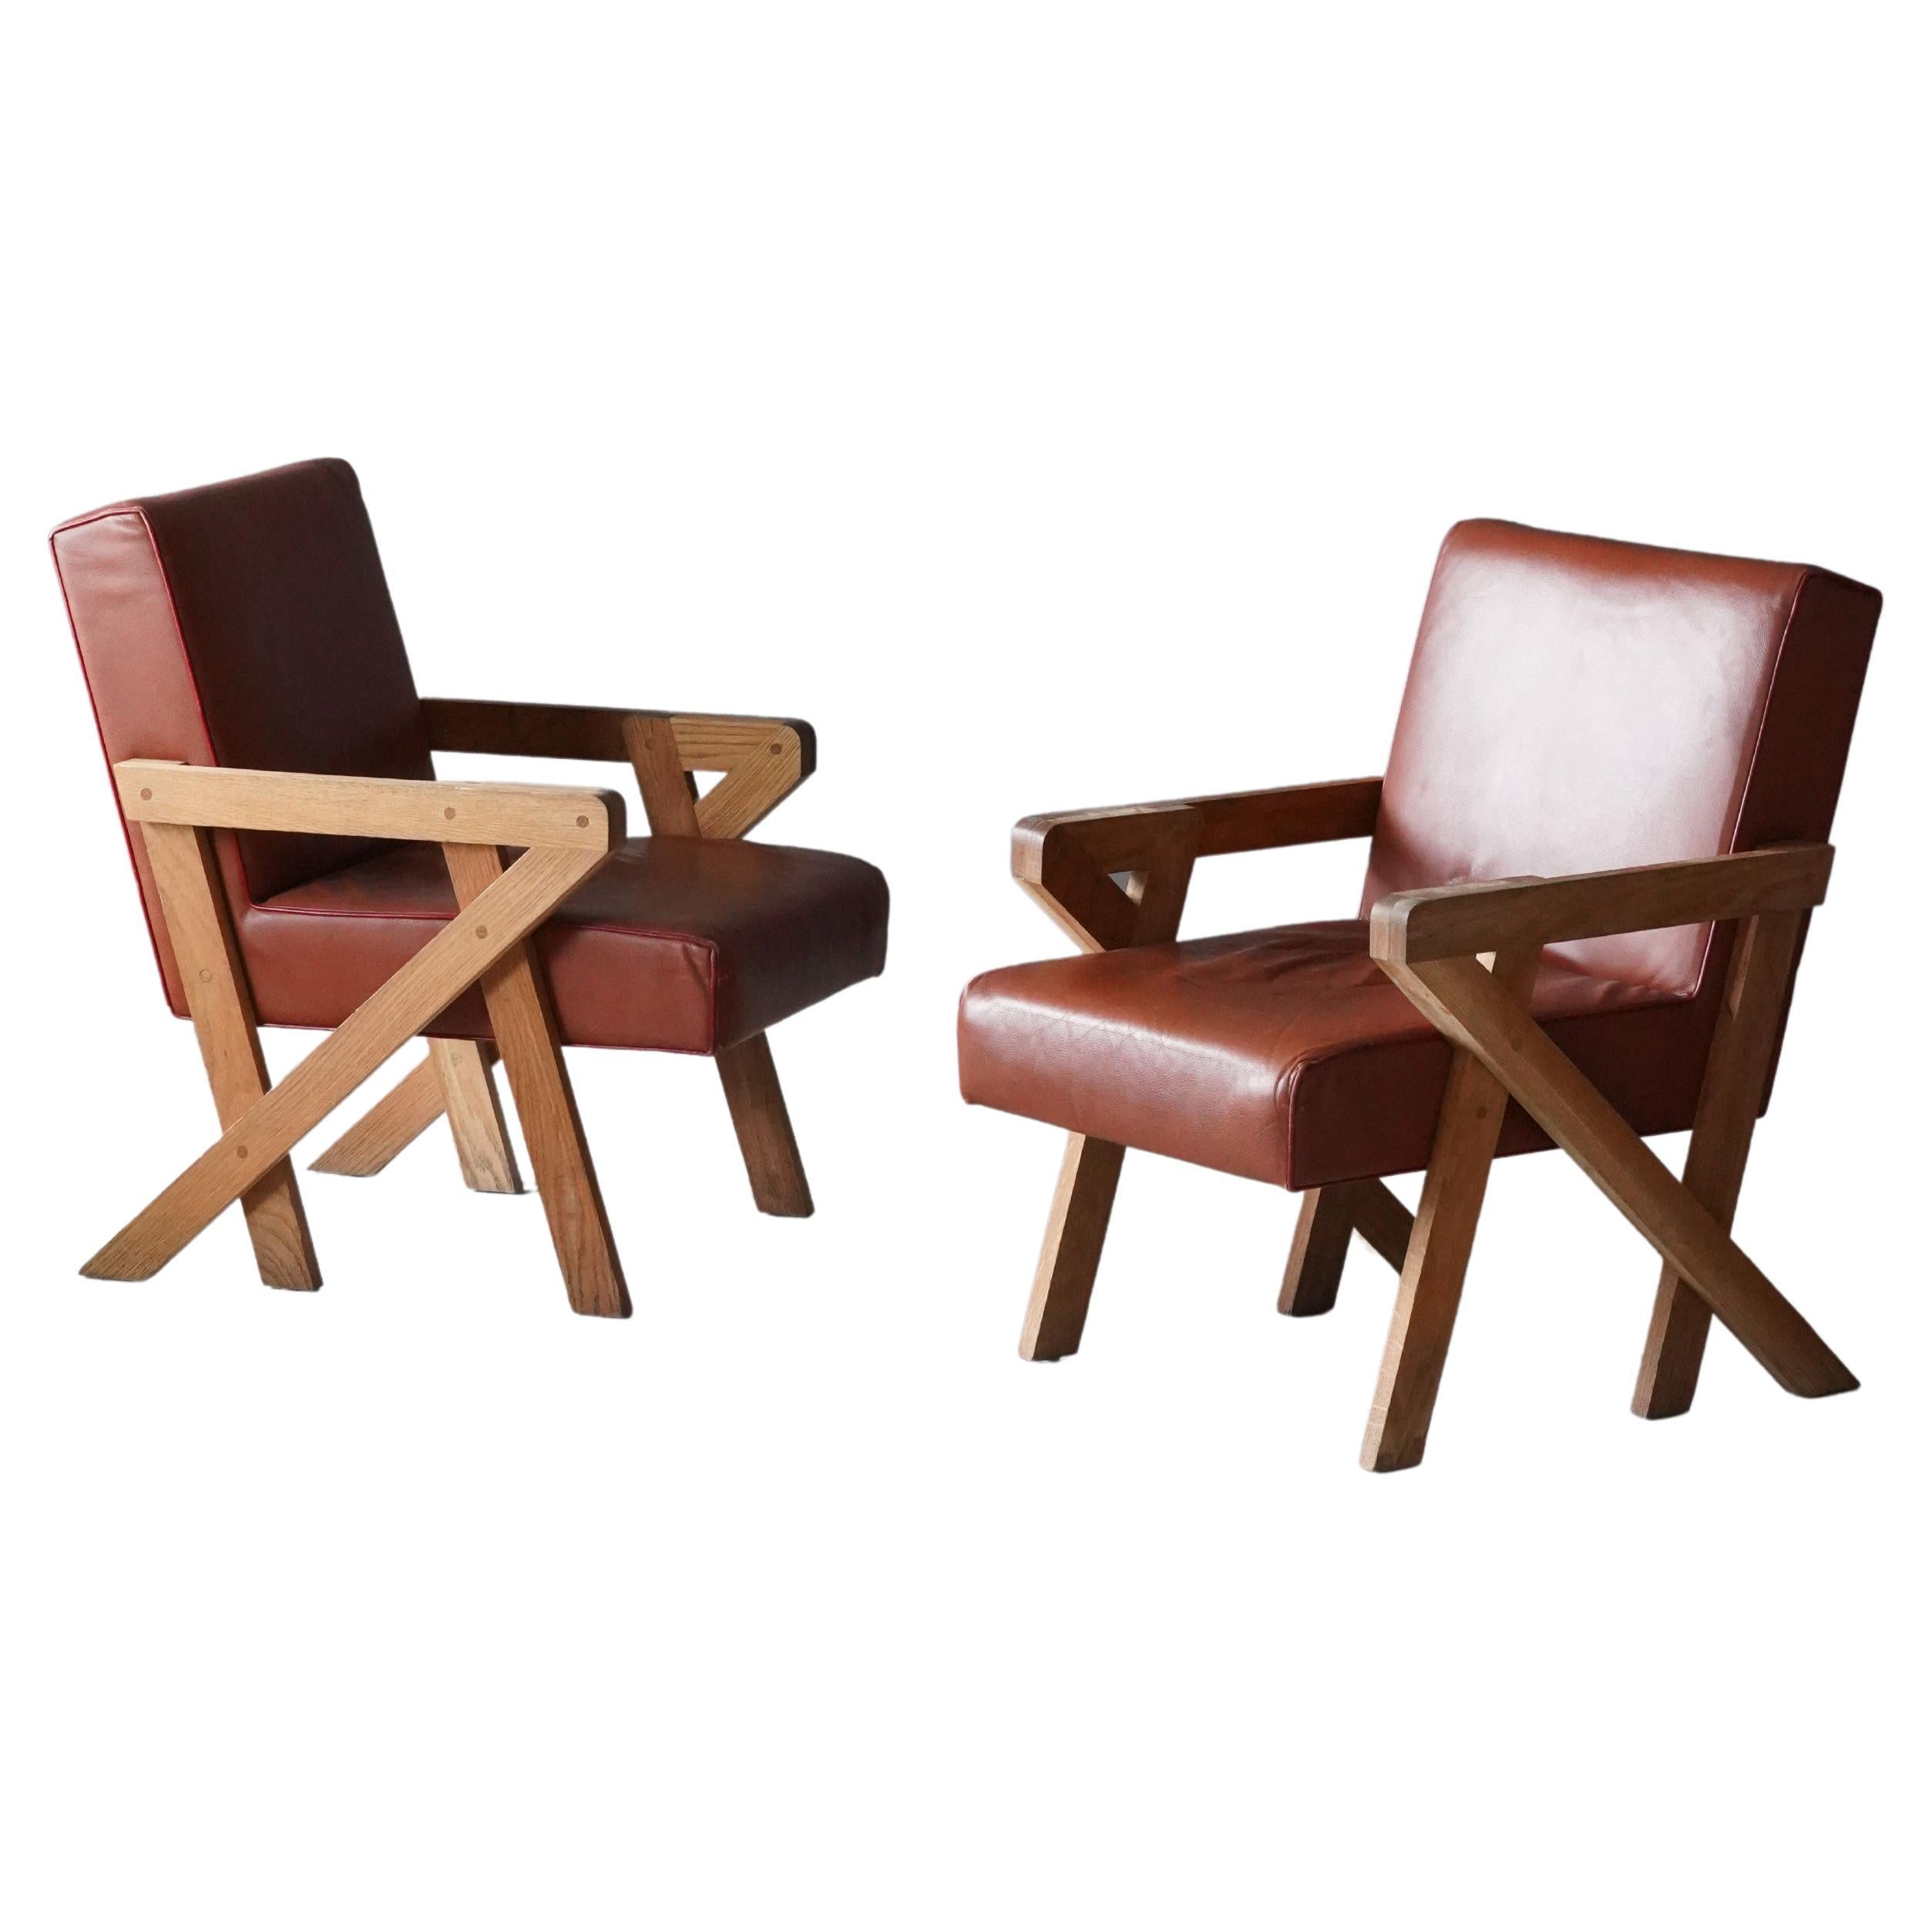 Ali Tayar, Armchairs from Pop Pub, Oak, Brown Leather, United States, 2011